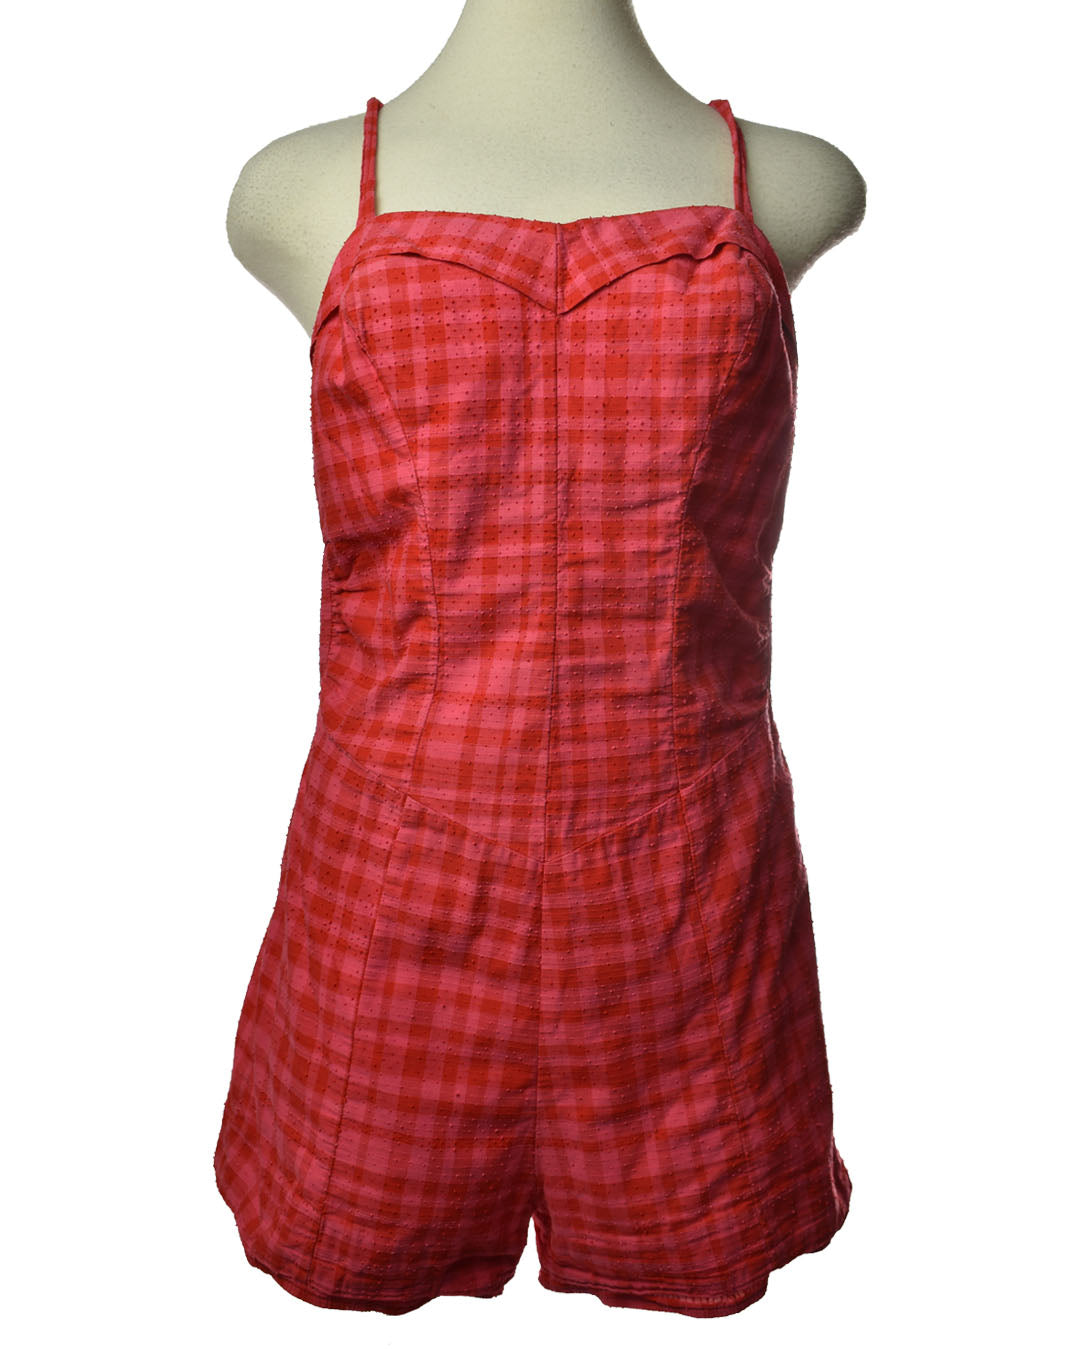 Vintage 50s Playsuit Plaid Cotton Swimsuit by Catalina Pin Up